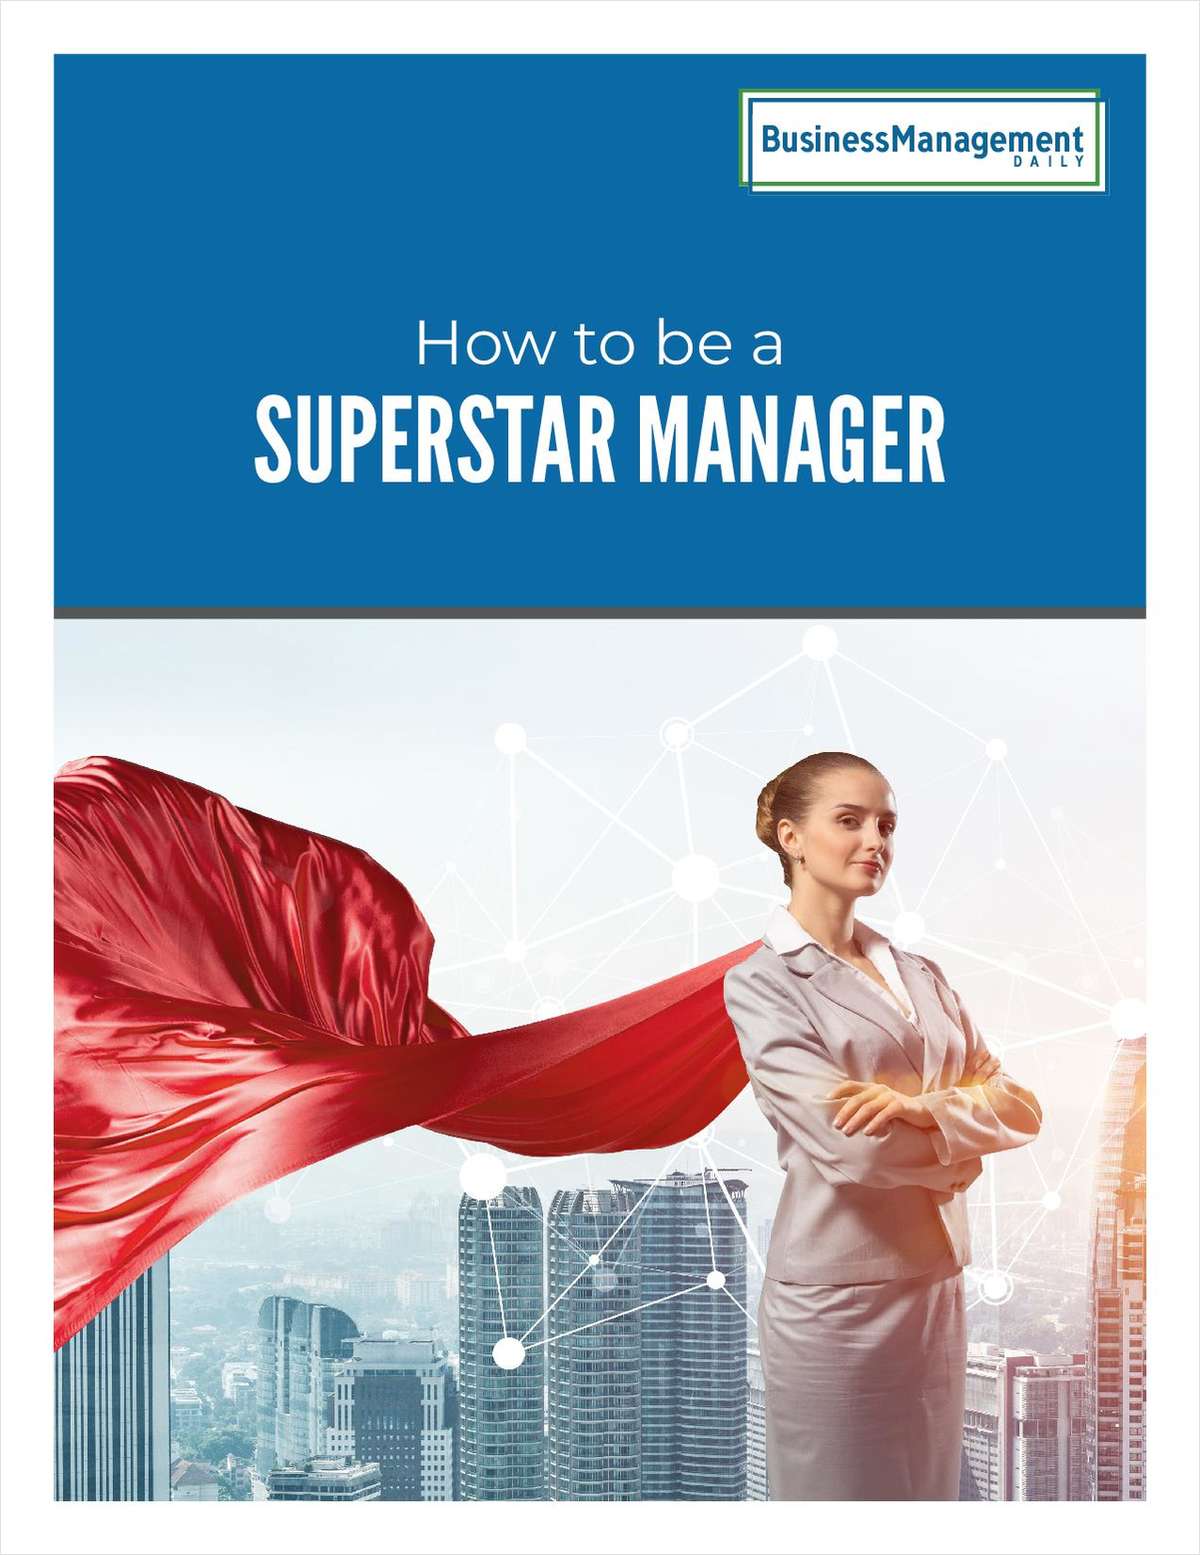 How to be a superstar manager